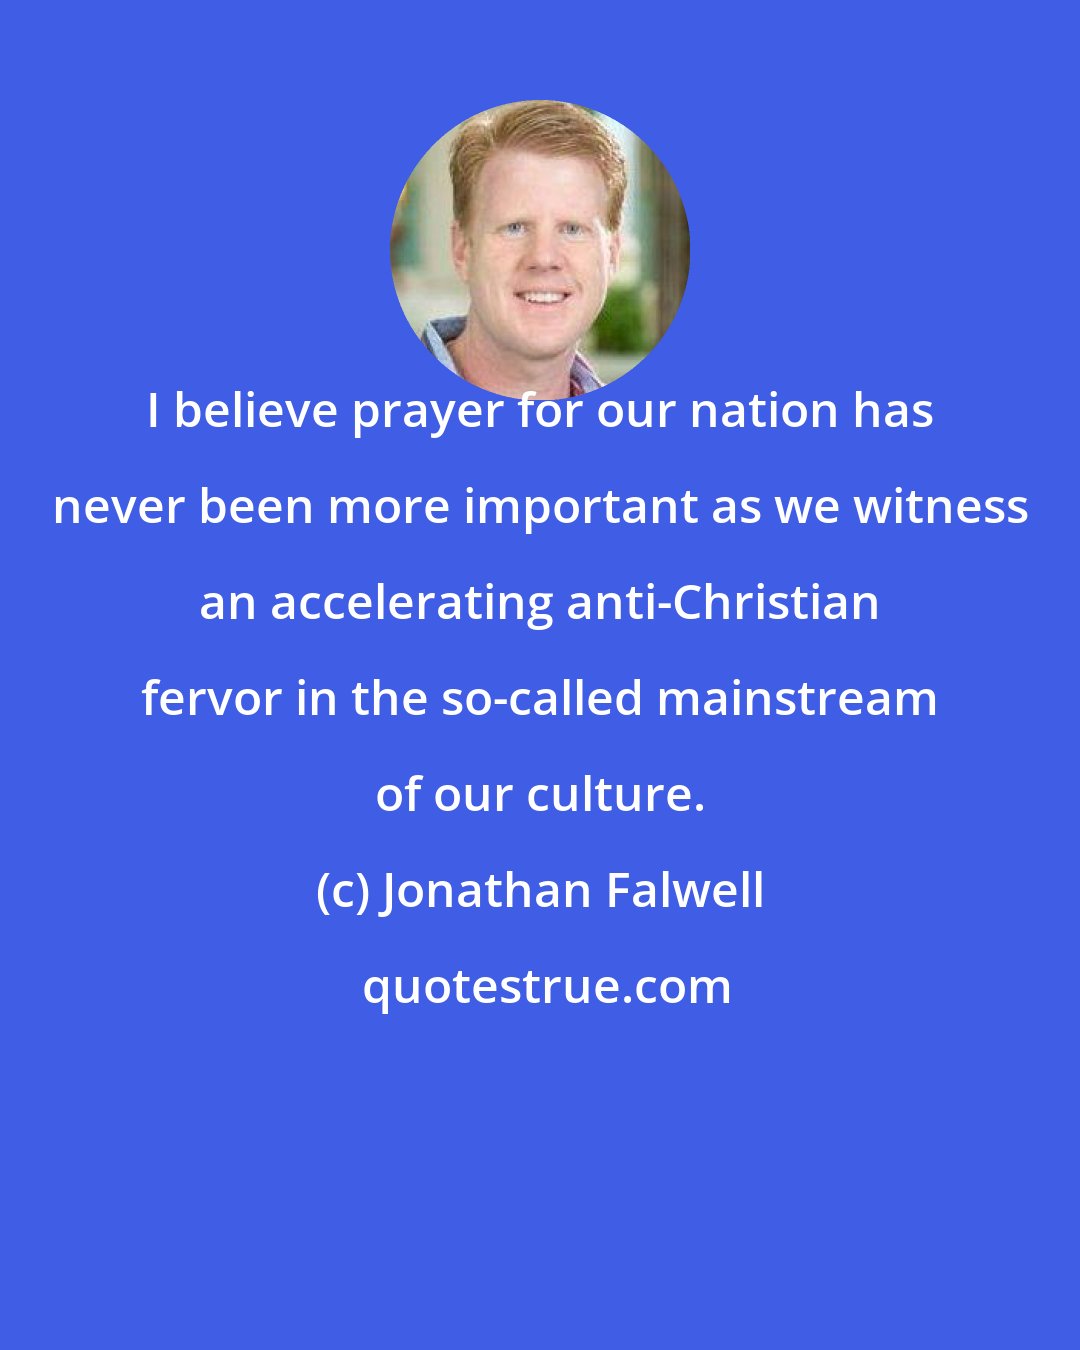 Jonathan Falwell: I believe prayer for our nation has never been more important as we witness an accelerating anti-Christian fervor in the so-called mainstream of our culture.